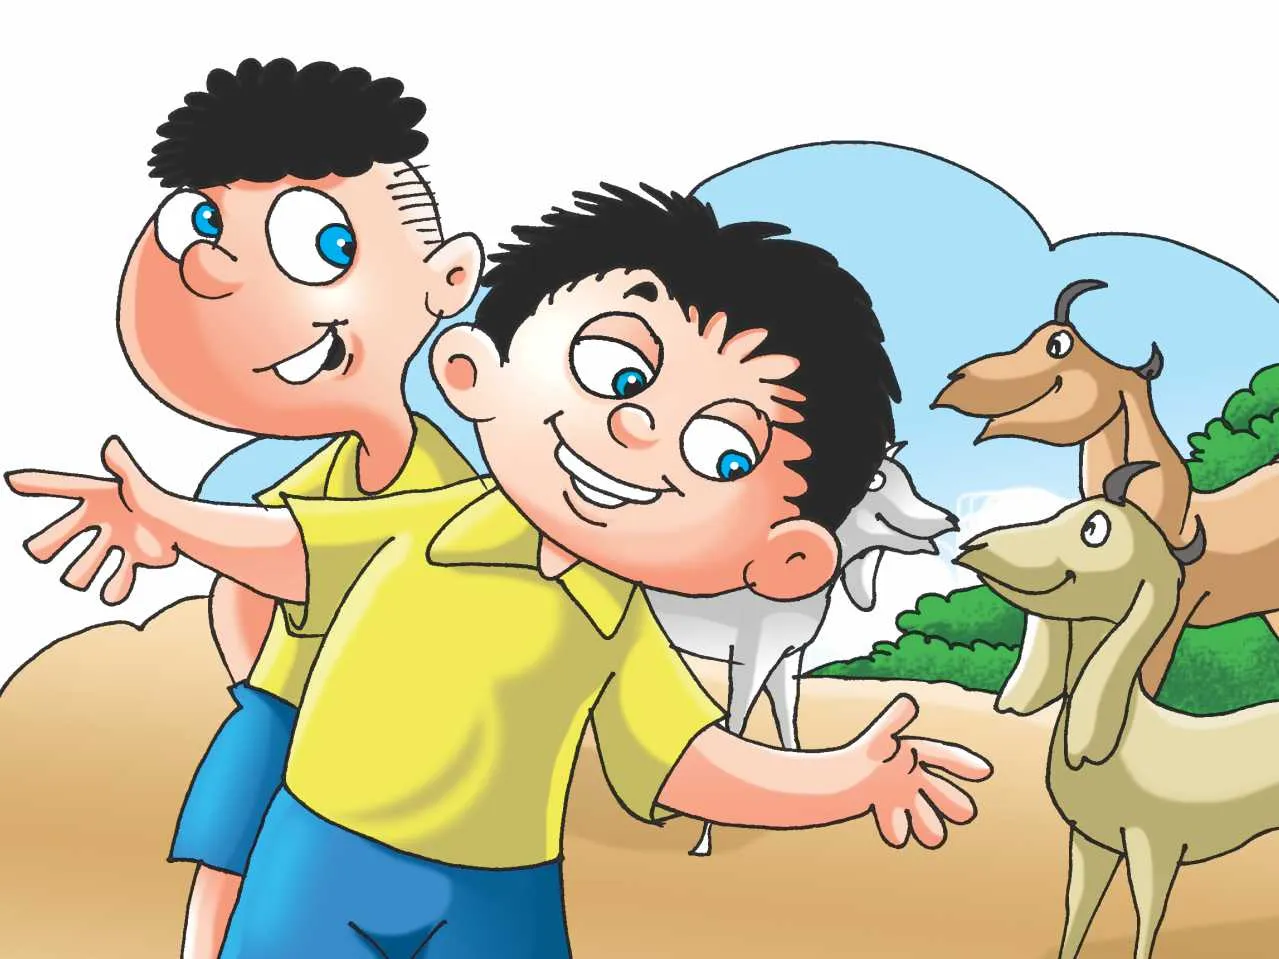 Two school boys and goats cartoon image